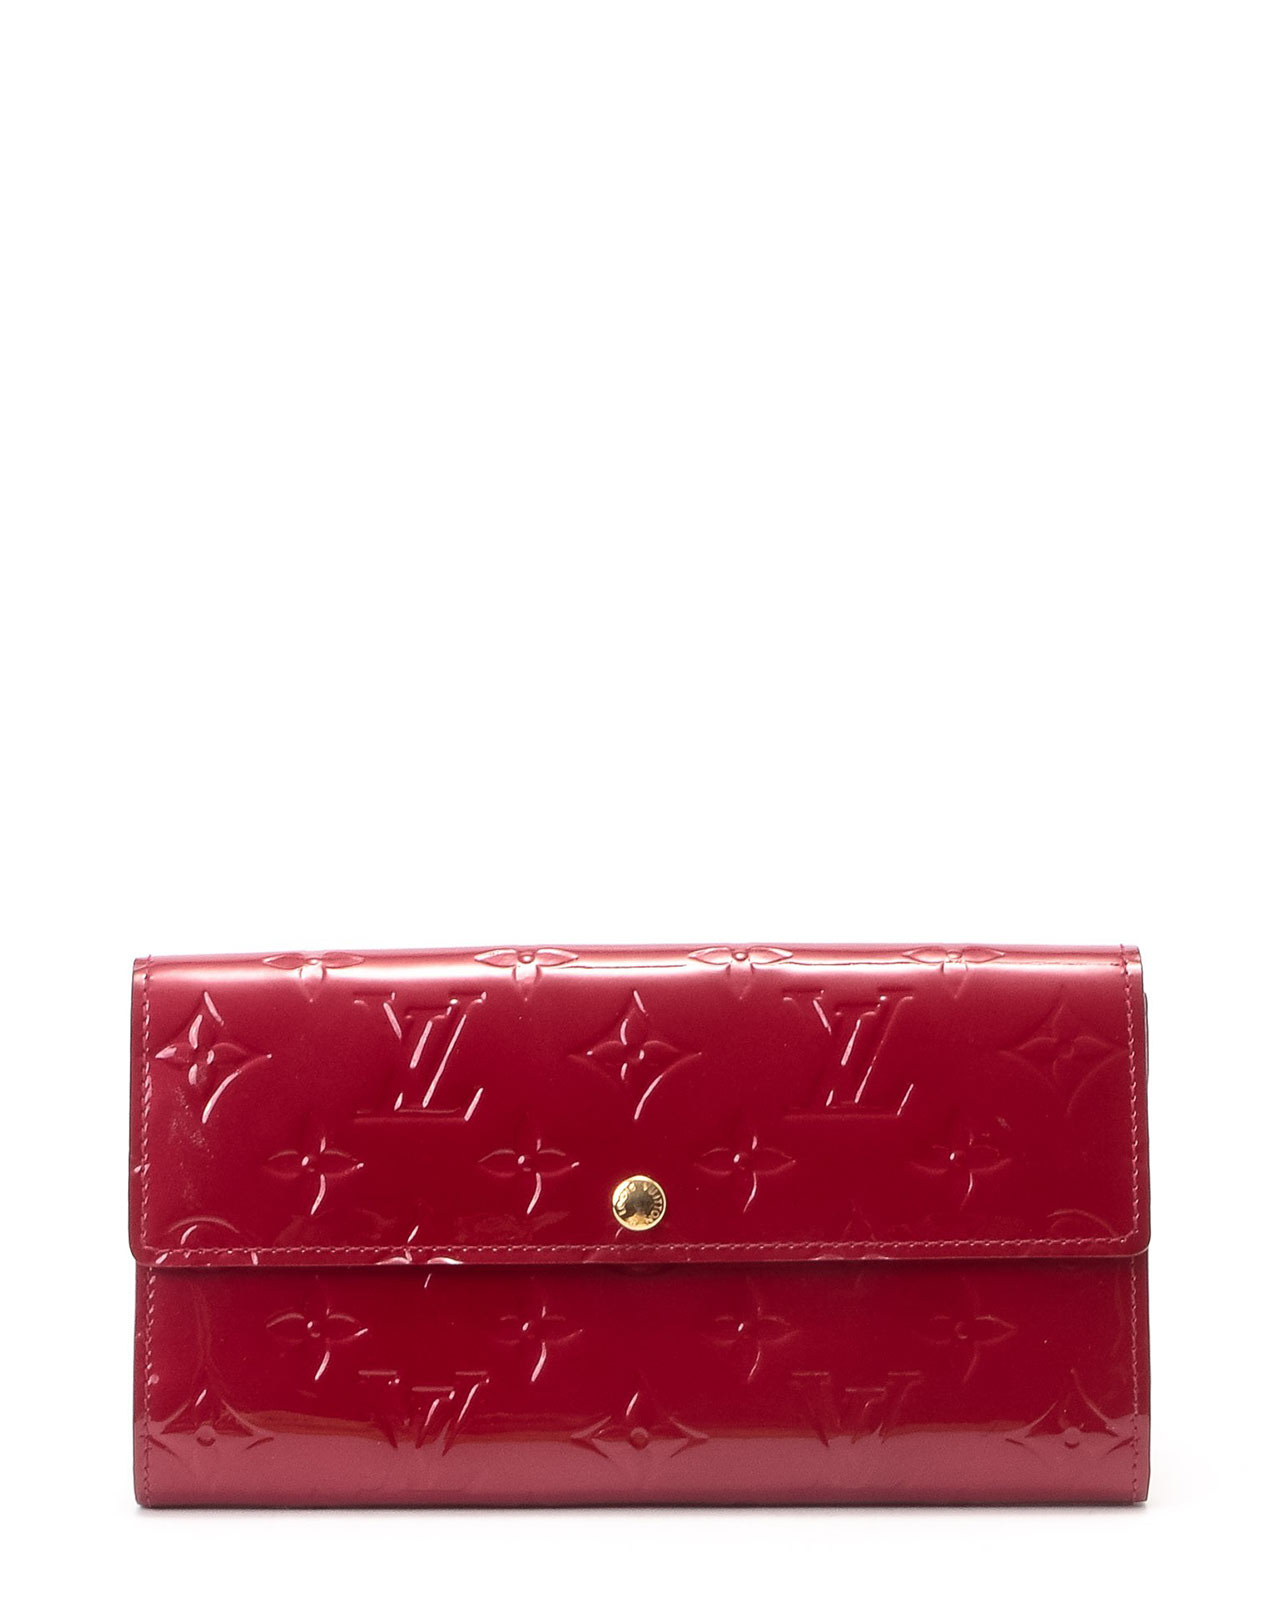 Lyst - Louis Vuitton Red Sarah Wallet in Red